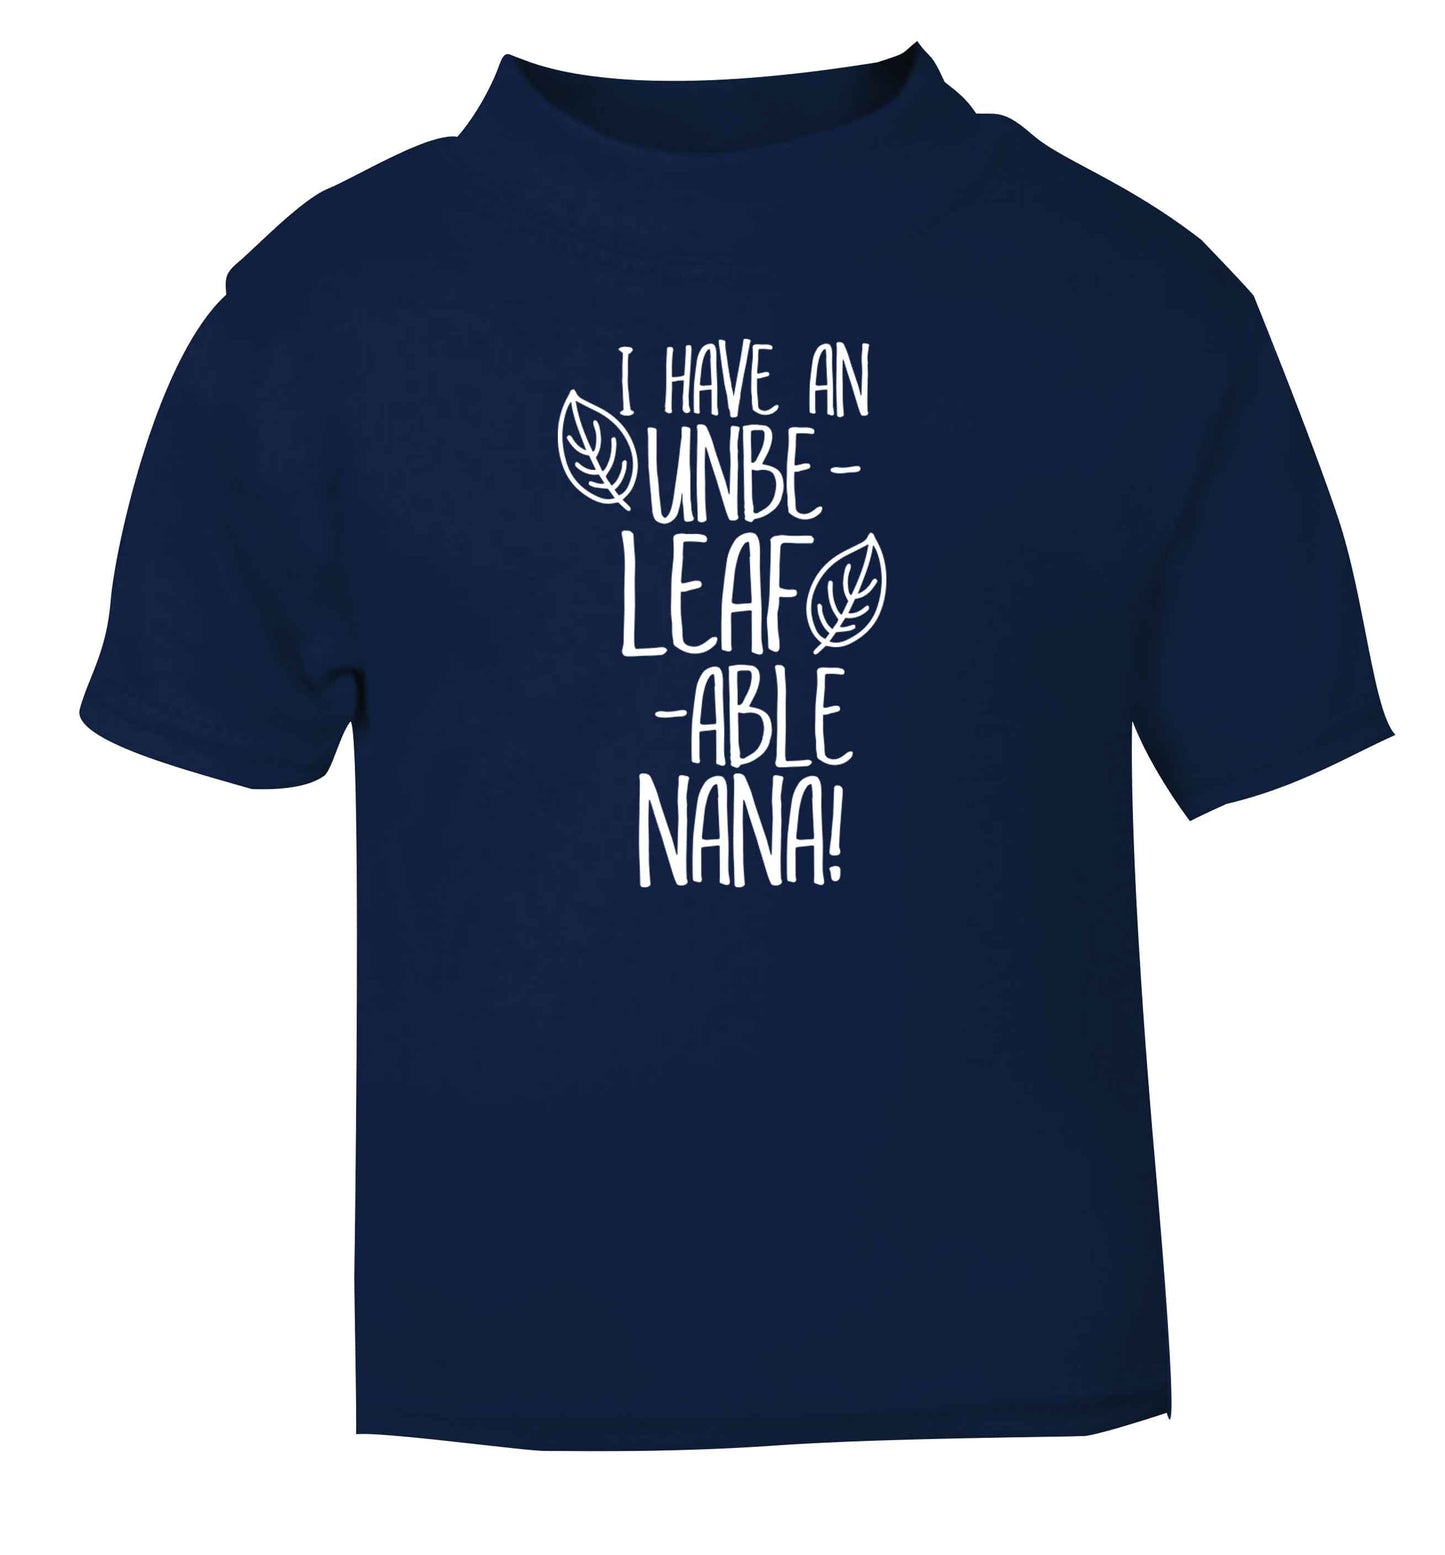 I have an unbe-leaf-able nana navy Baby Toddler Tshirt 2 Years